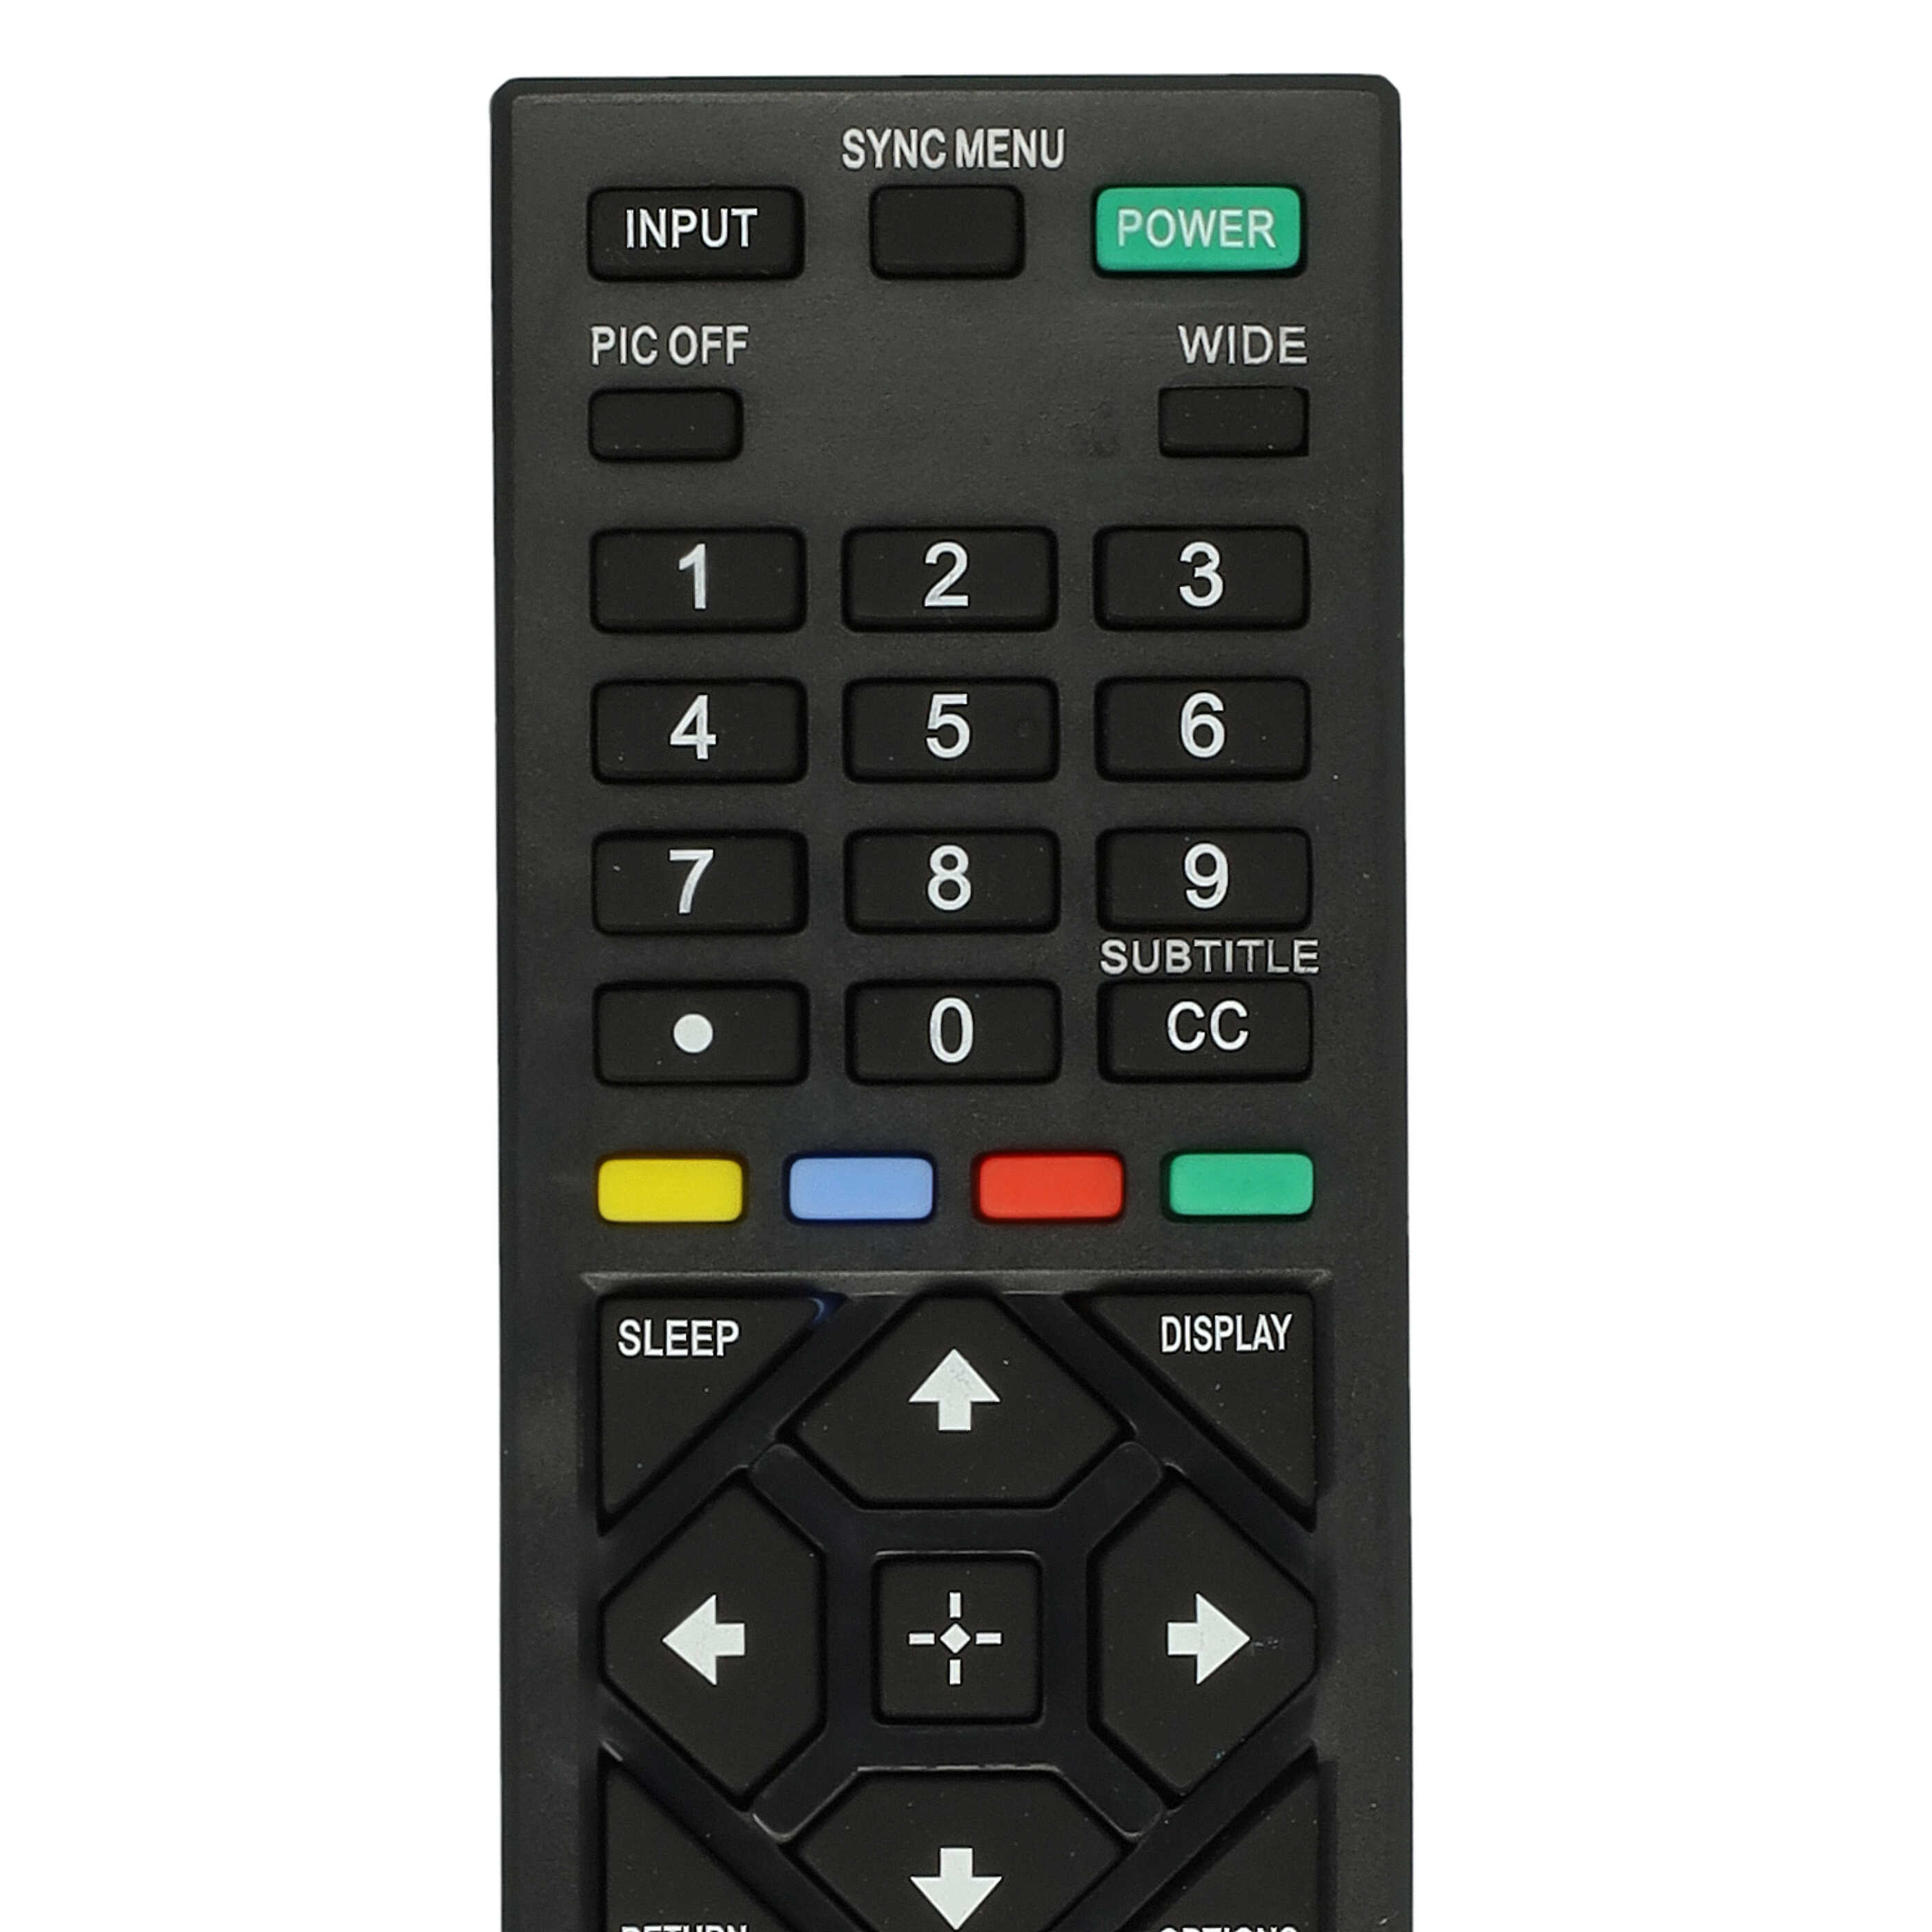 Remote Control replaces Sony RM-YD092 for Sony TV